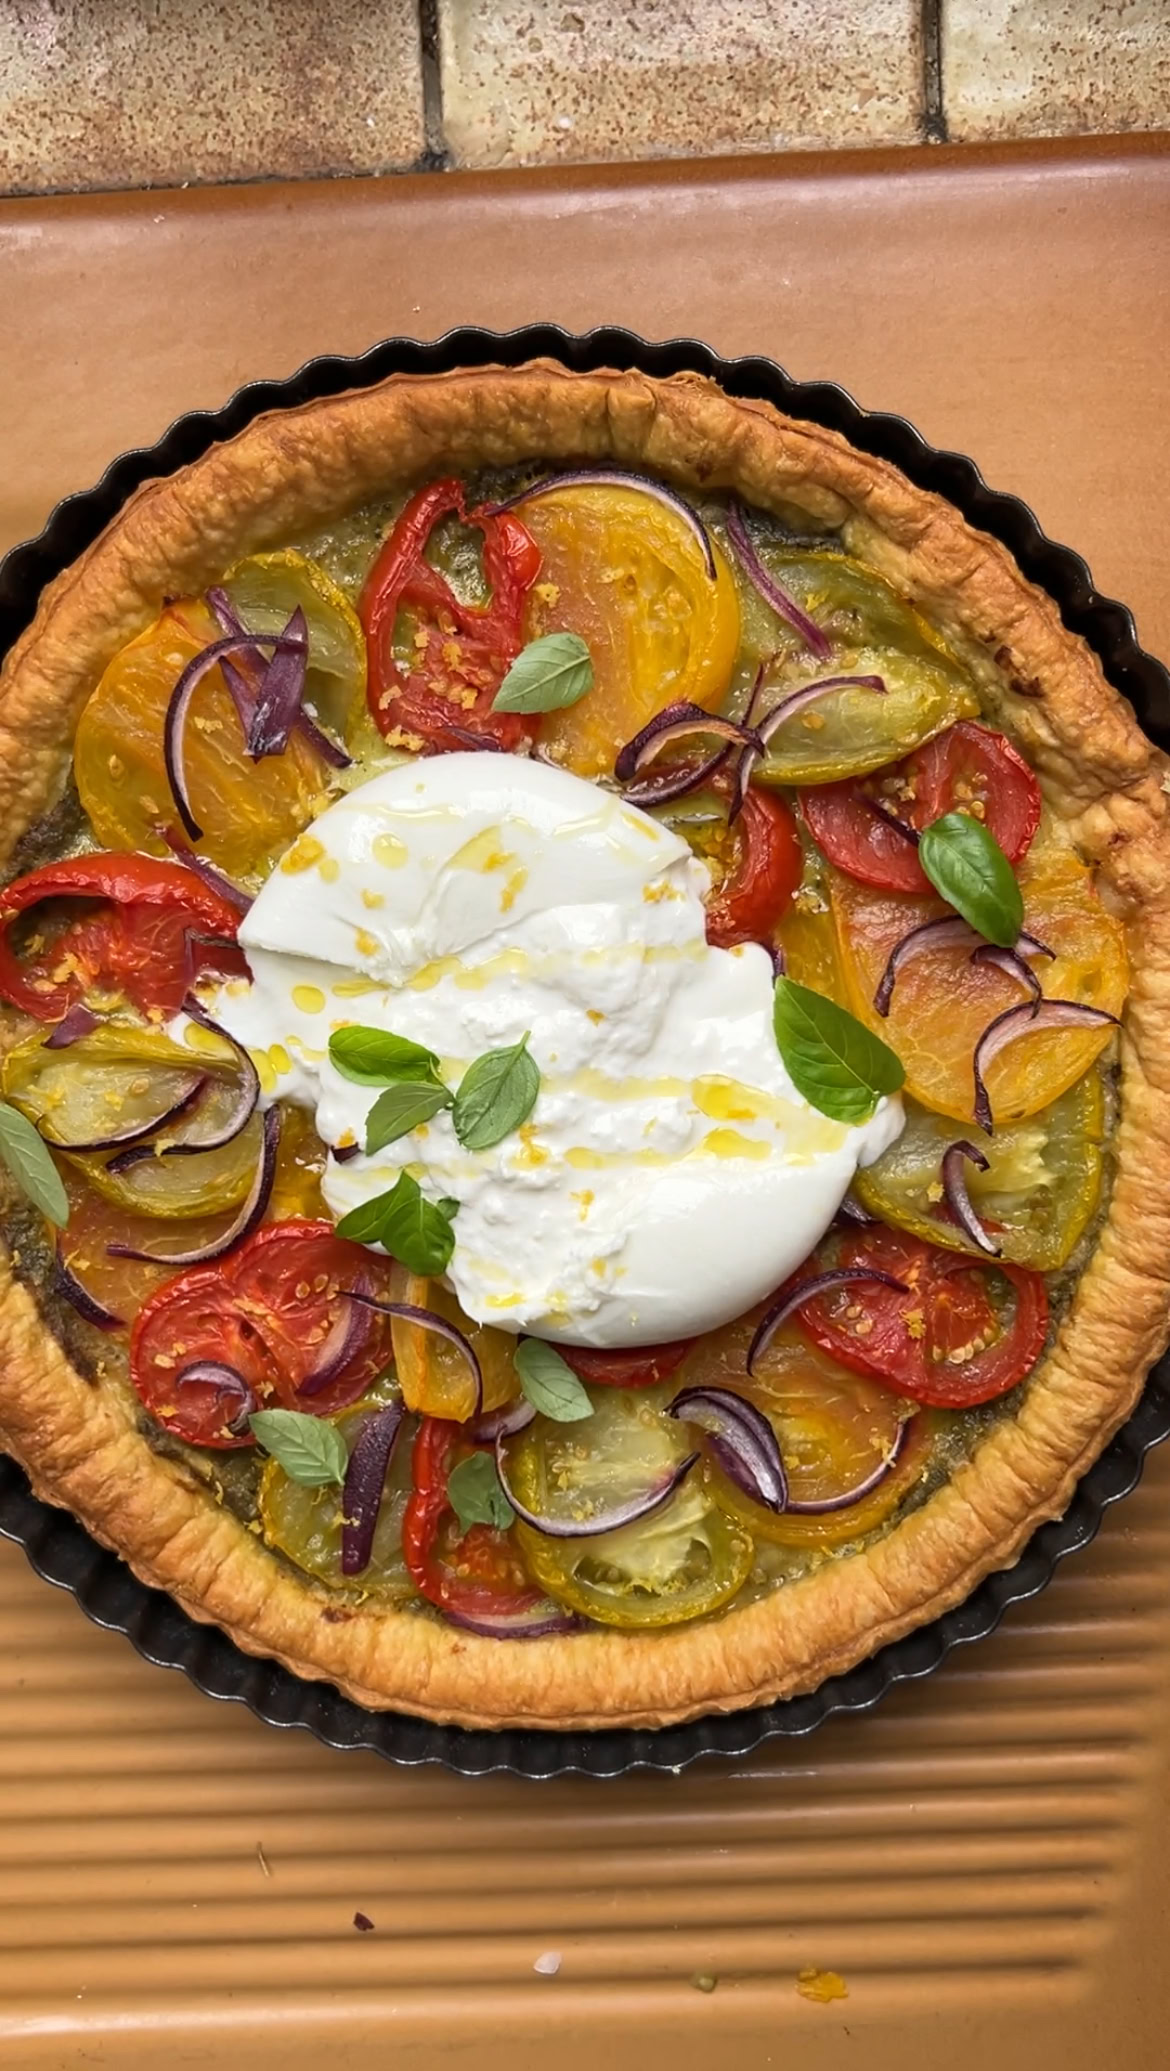 Burrata added to tomato tart, with a few fresh basil leaves and a drizzle of olive oil.